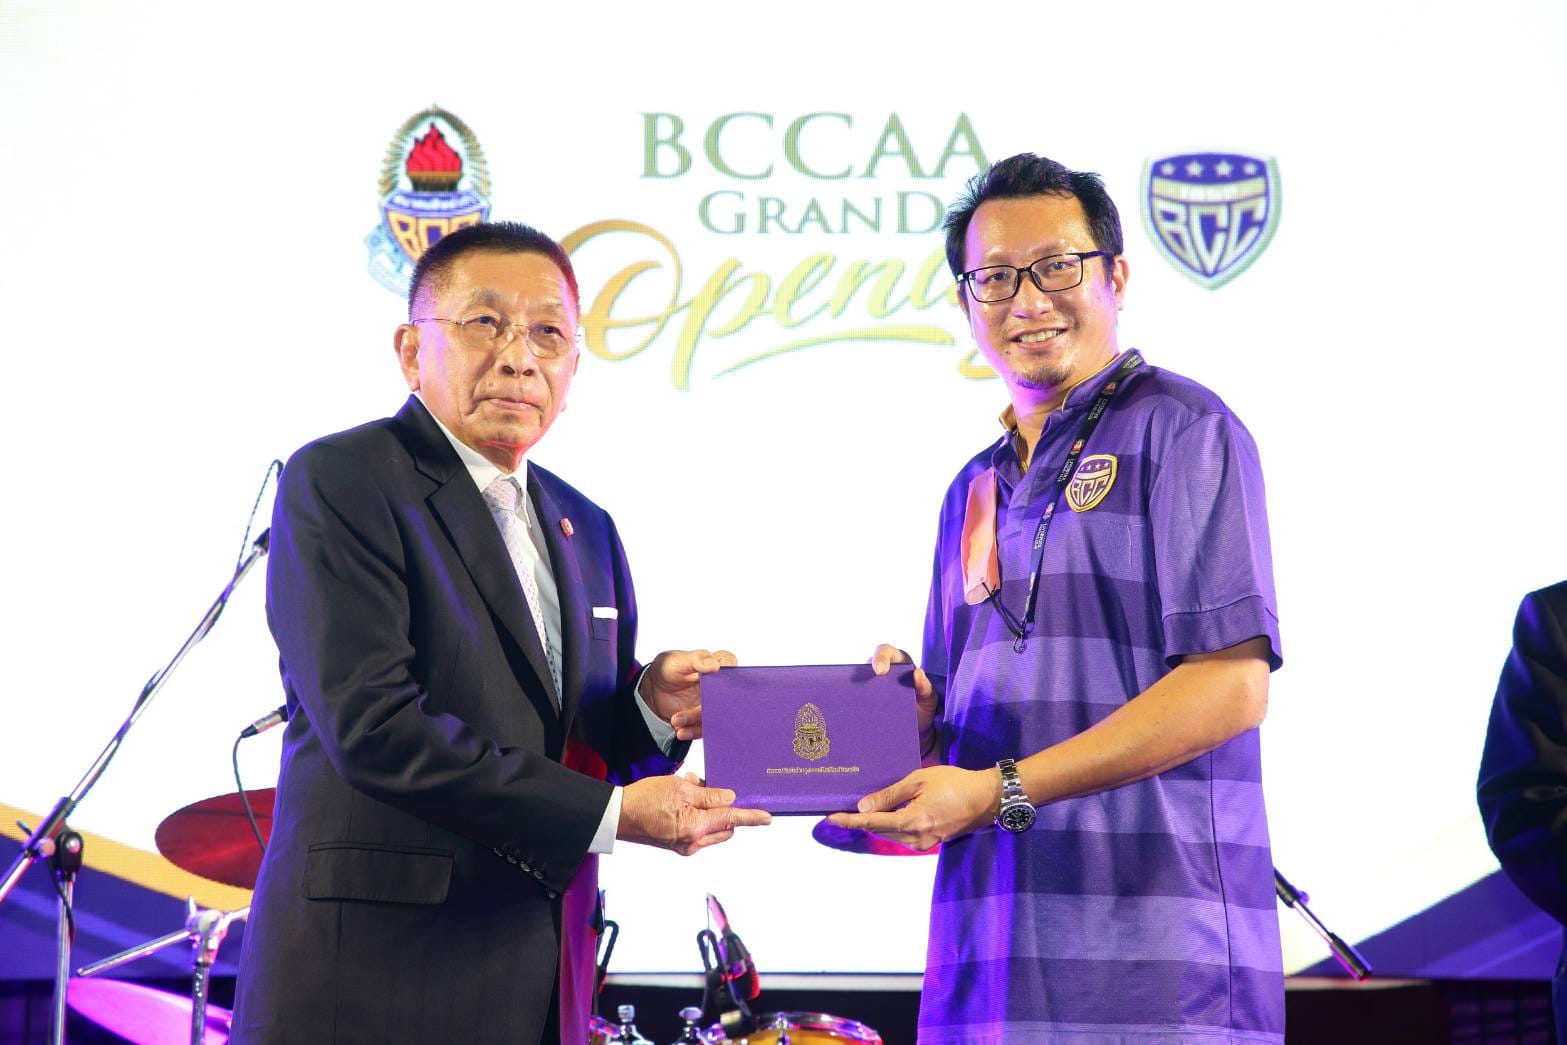 BCCAA GRAND OPENING _46